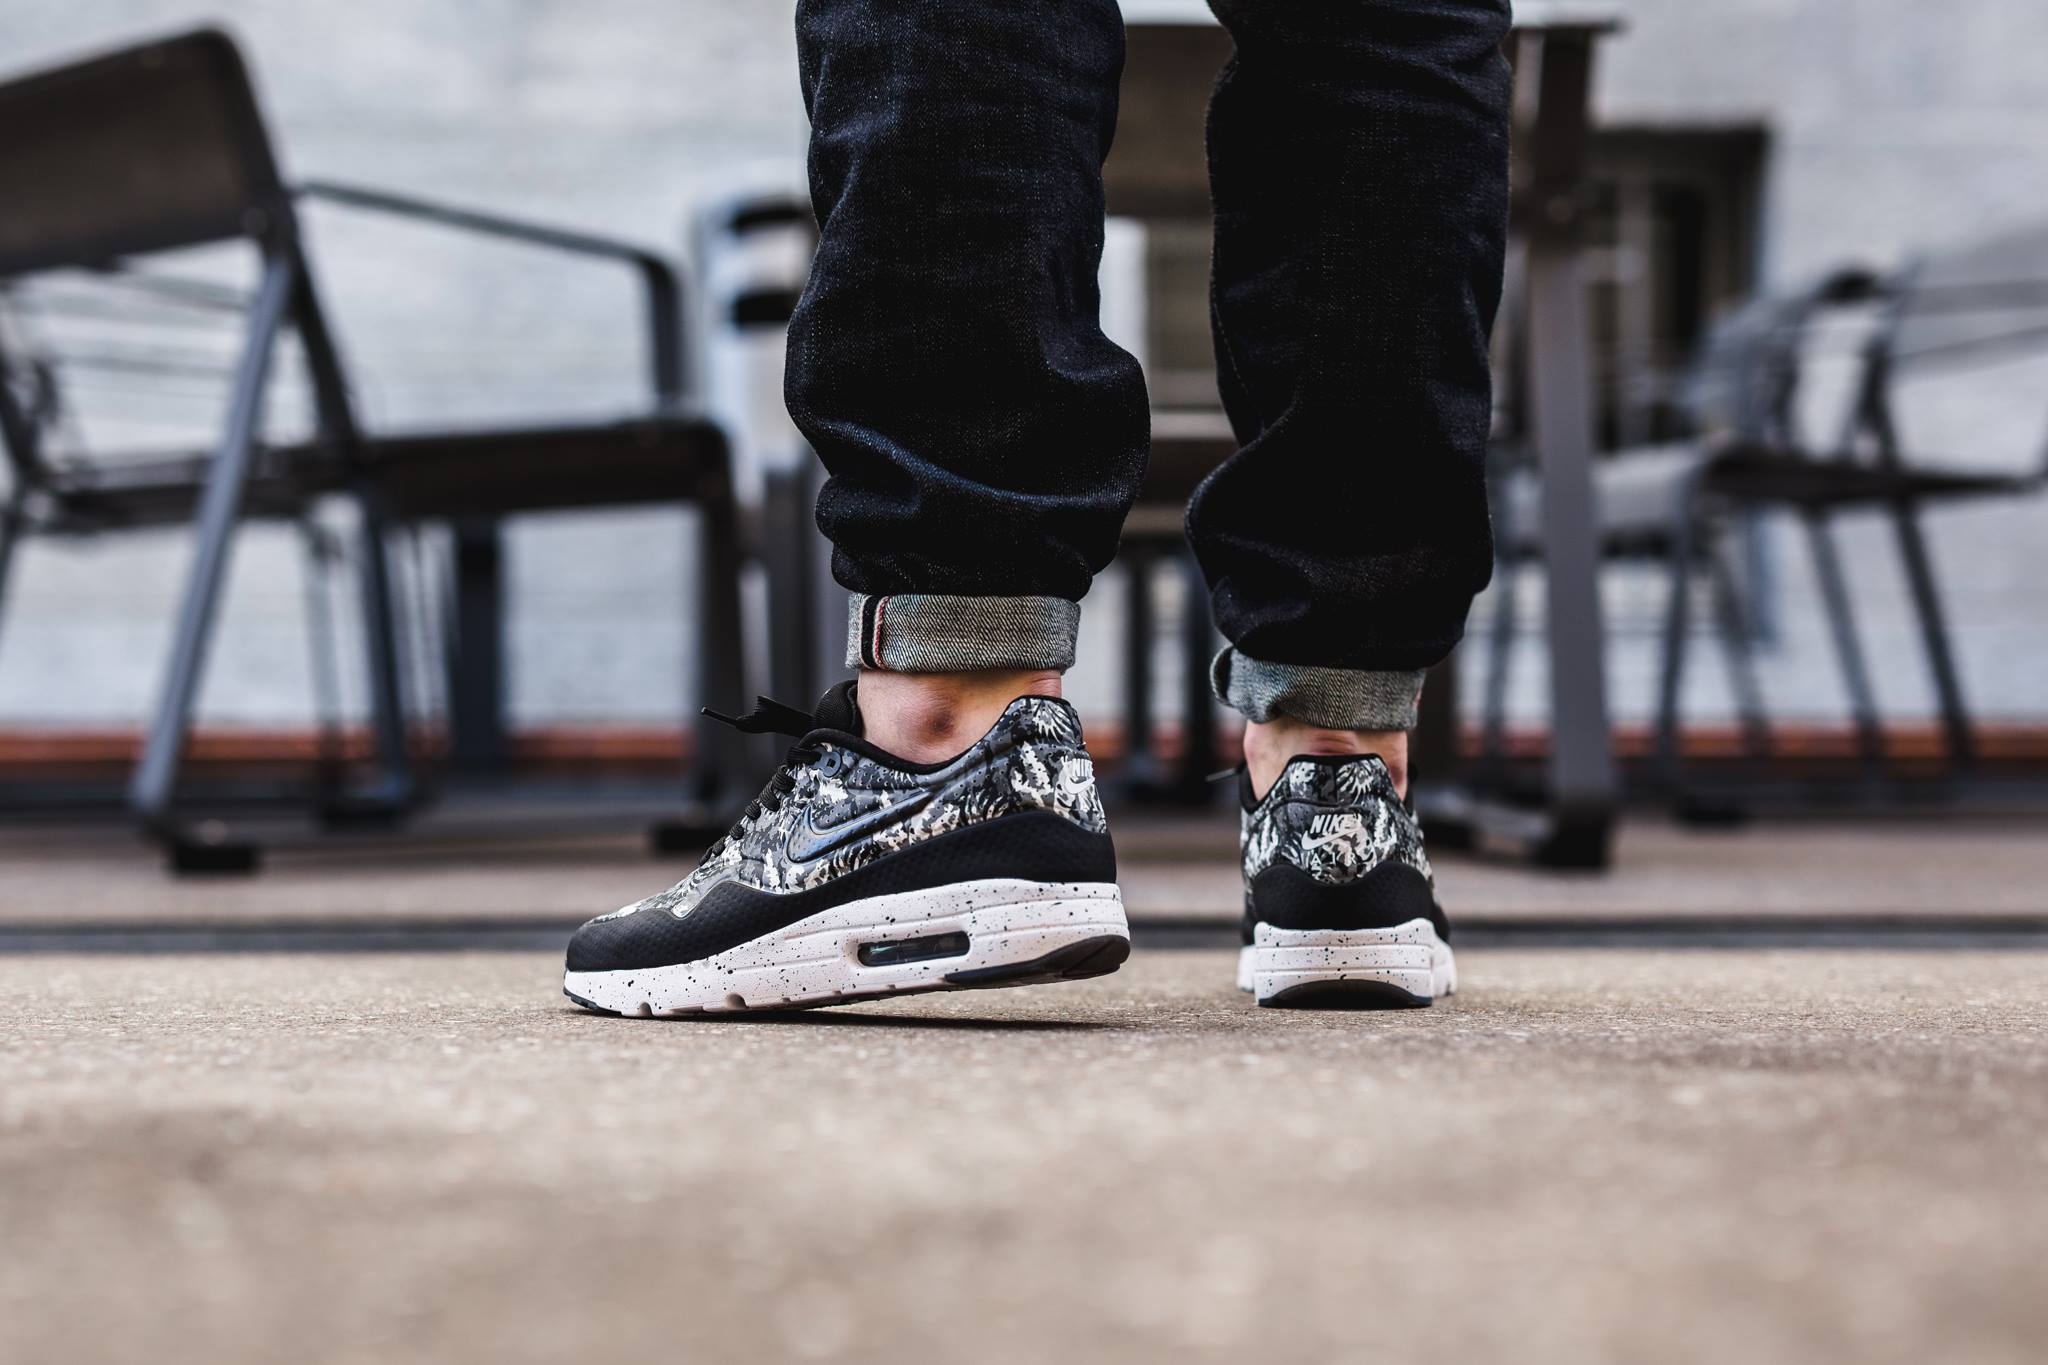 automaat Een deel Tijdens ~ Nike Air Max 1 Ultra Moire Black White Floral Trainers Clearance – Cheap Nike  air max, wholesale Nike Air Max 90 shoes